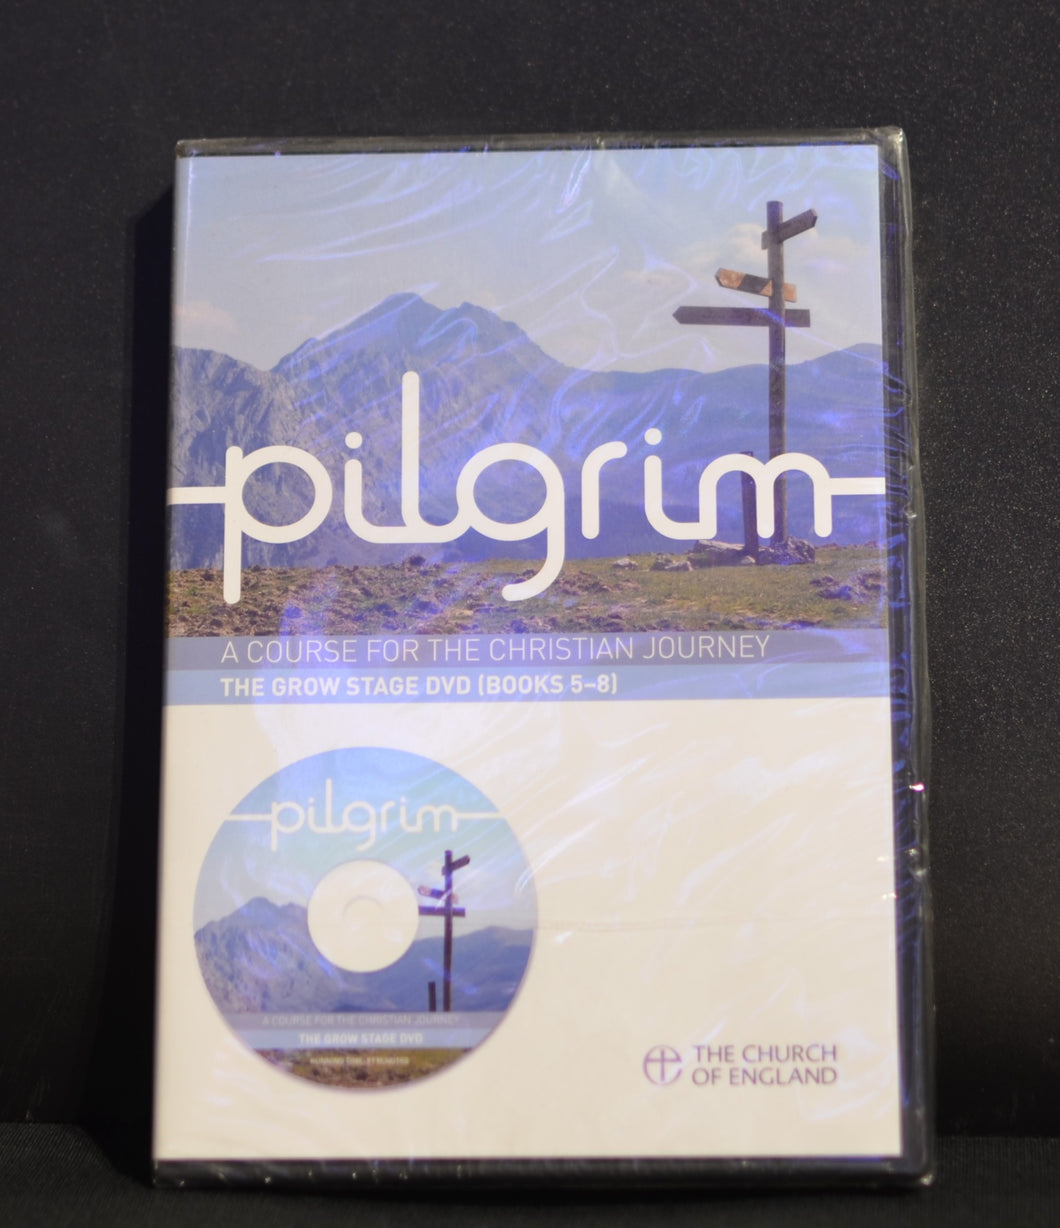 Pilgrim-A Course For The Christian Journey- DVD -Books 5-8